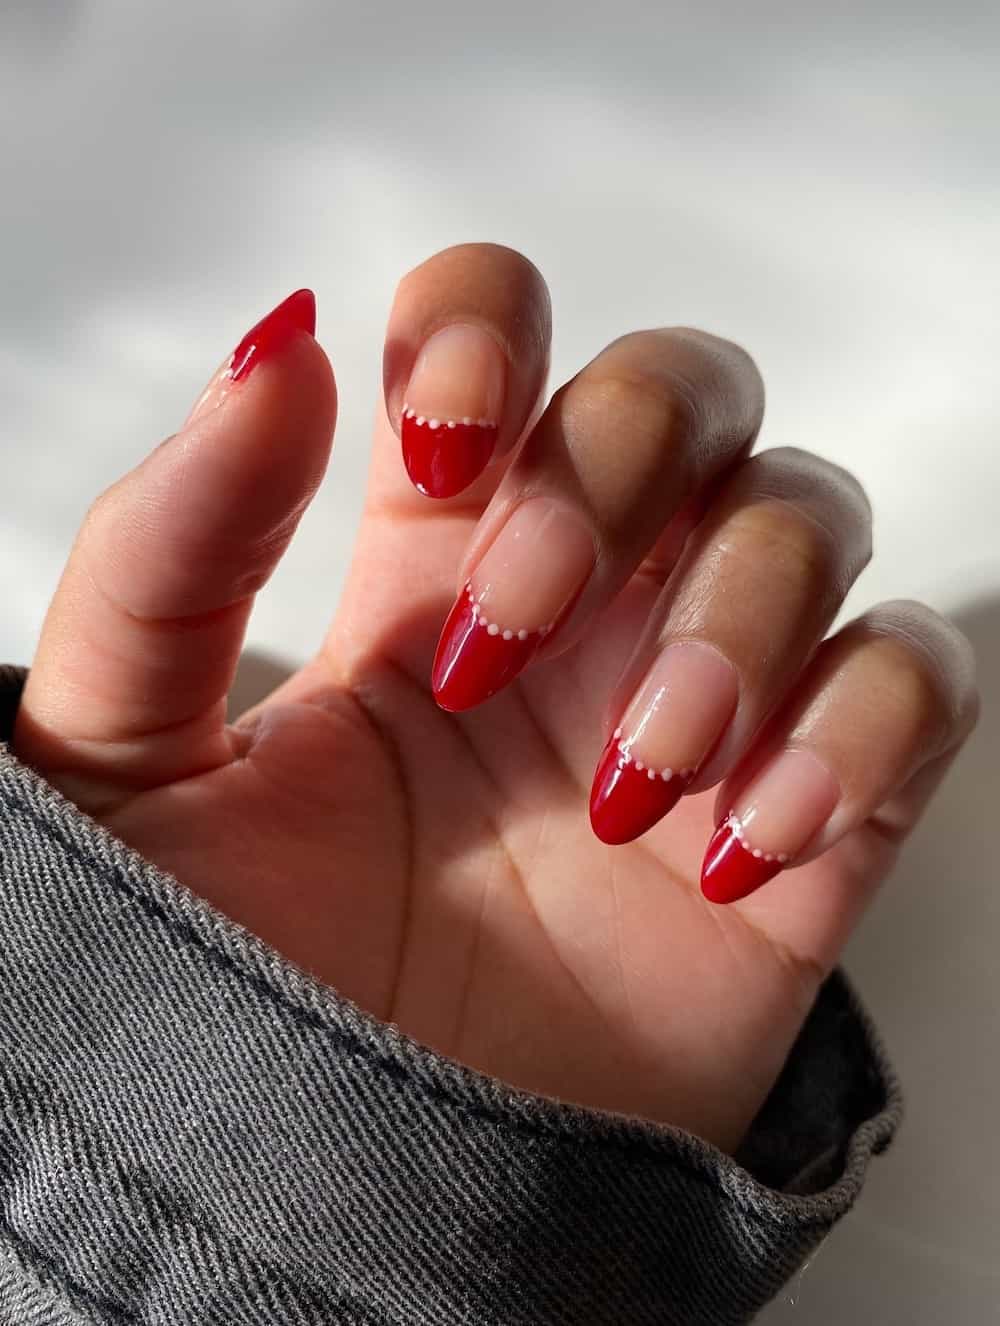 A hand with long almond nails painted with red French tips and lined with white dots